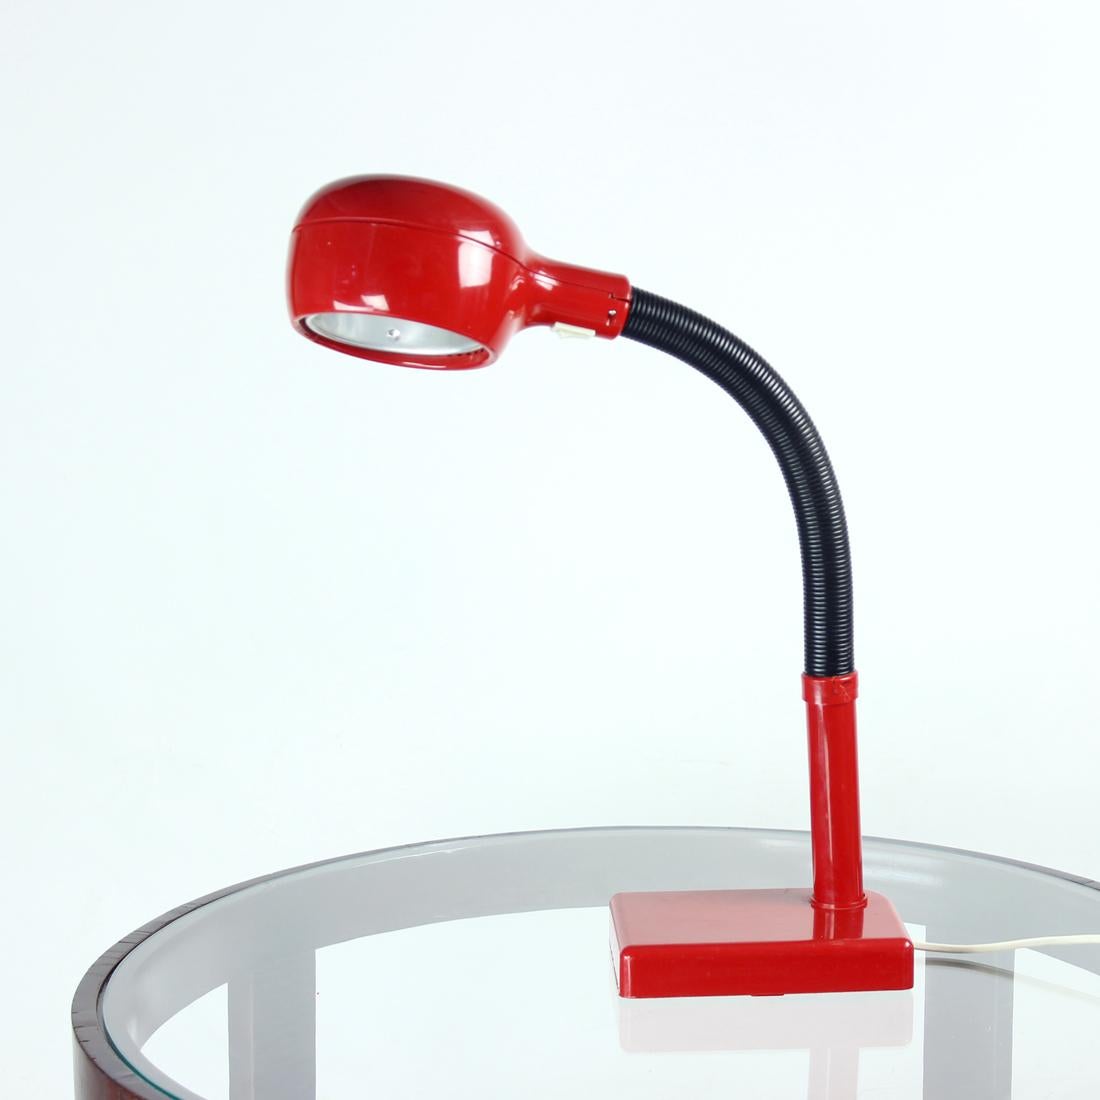 Great table lamp with design very typical for the midcentury era. Produced in 1960s in Hungary by Szarvasi Vas company, original label on the bottom (pictures). The lamp is made of red and black combination of plastic. The black part is a adjustable